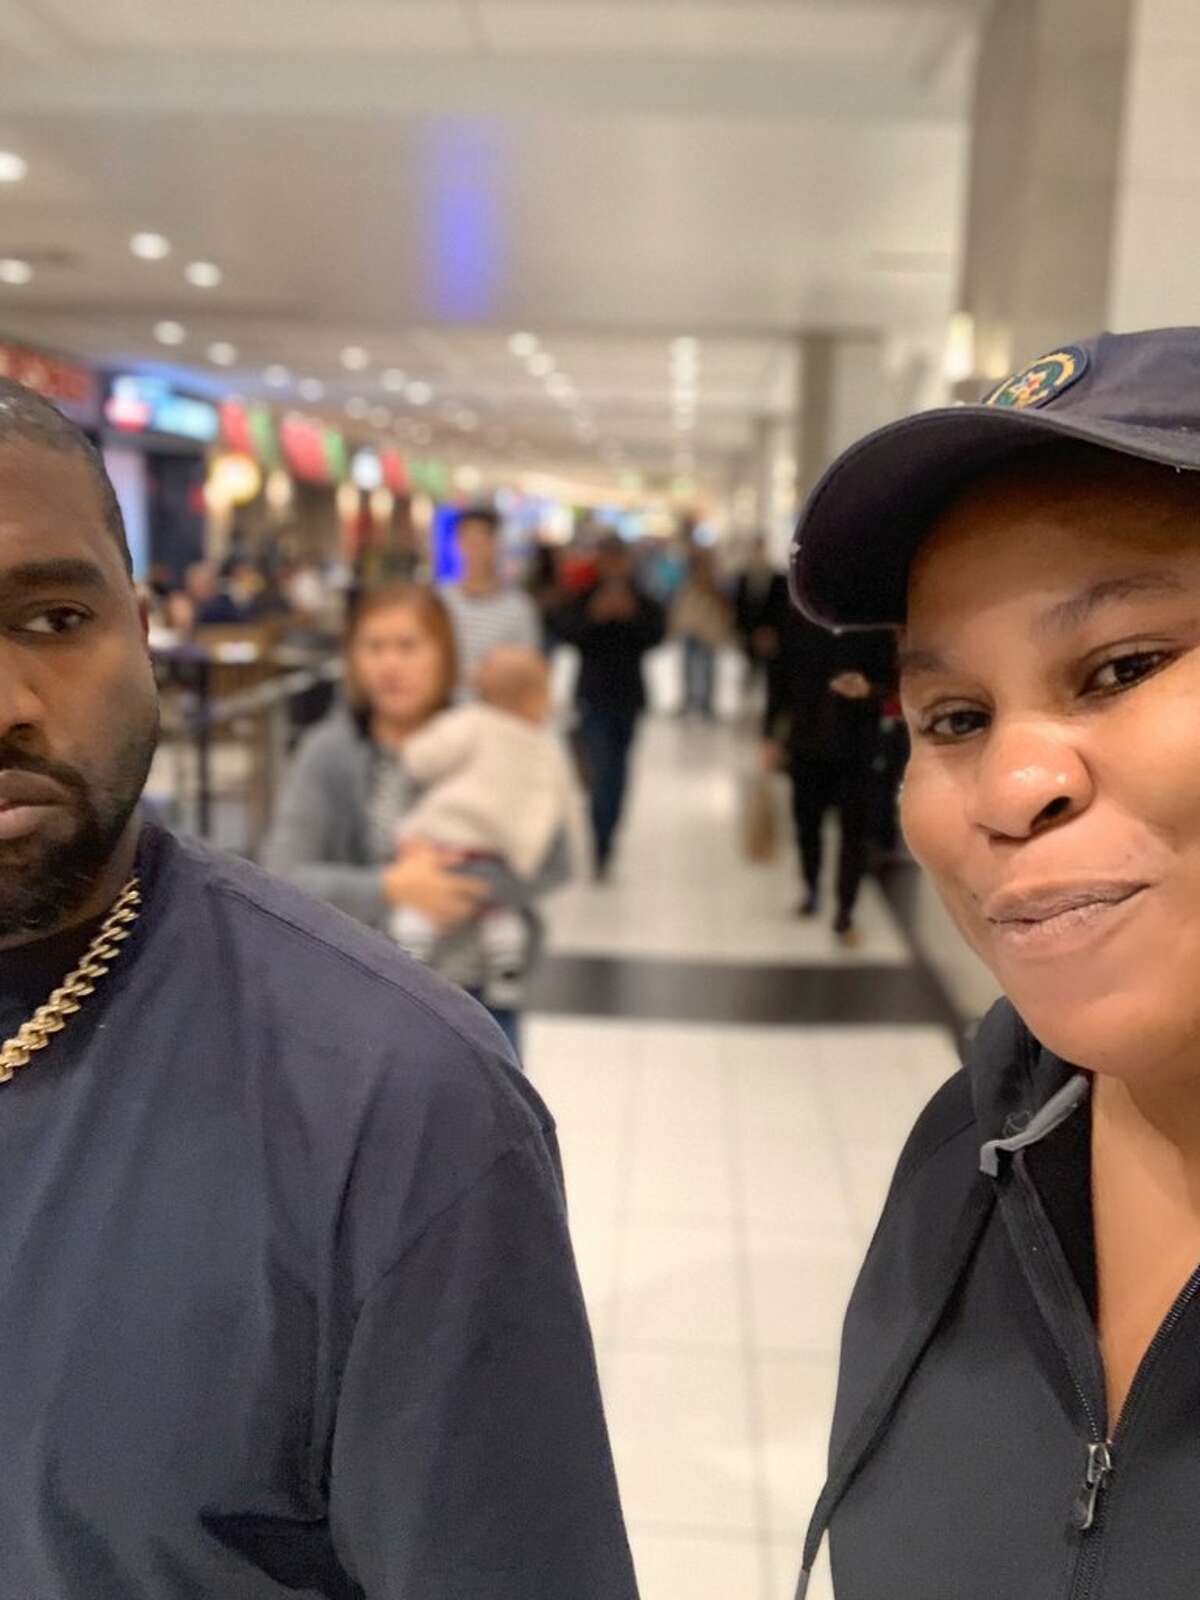 Kanye West was spotted Nov. 15 at The Galleria with Kim Kardashian and their kids.